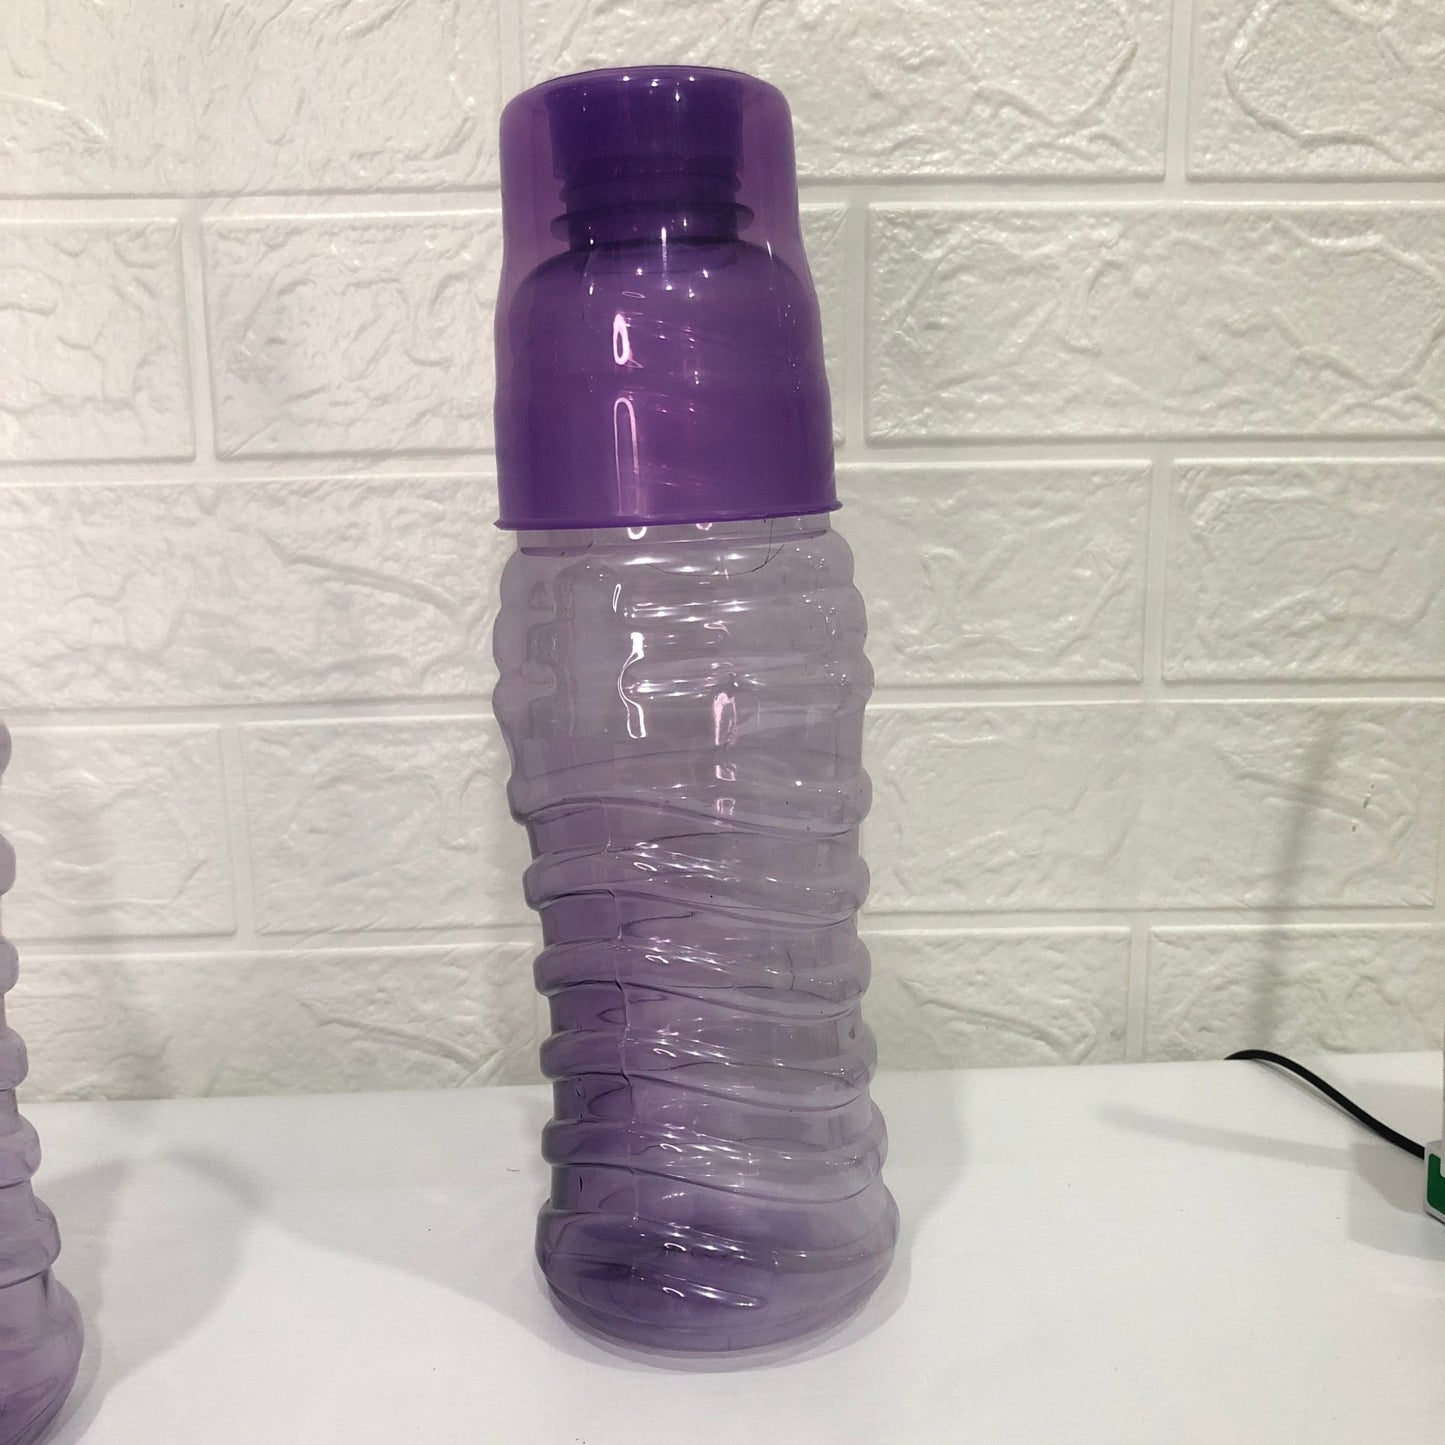 Pack Of 2 Glass Water Bottle - DS Traders